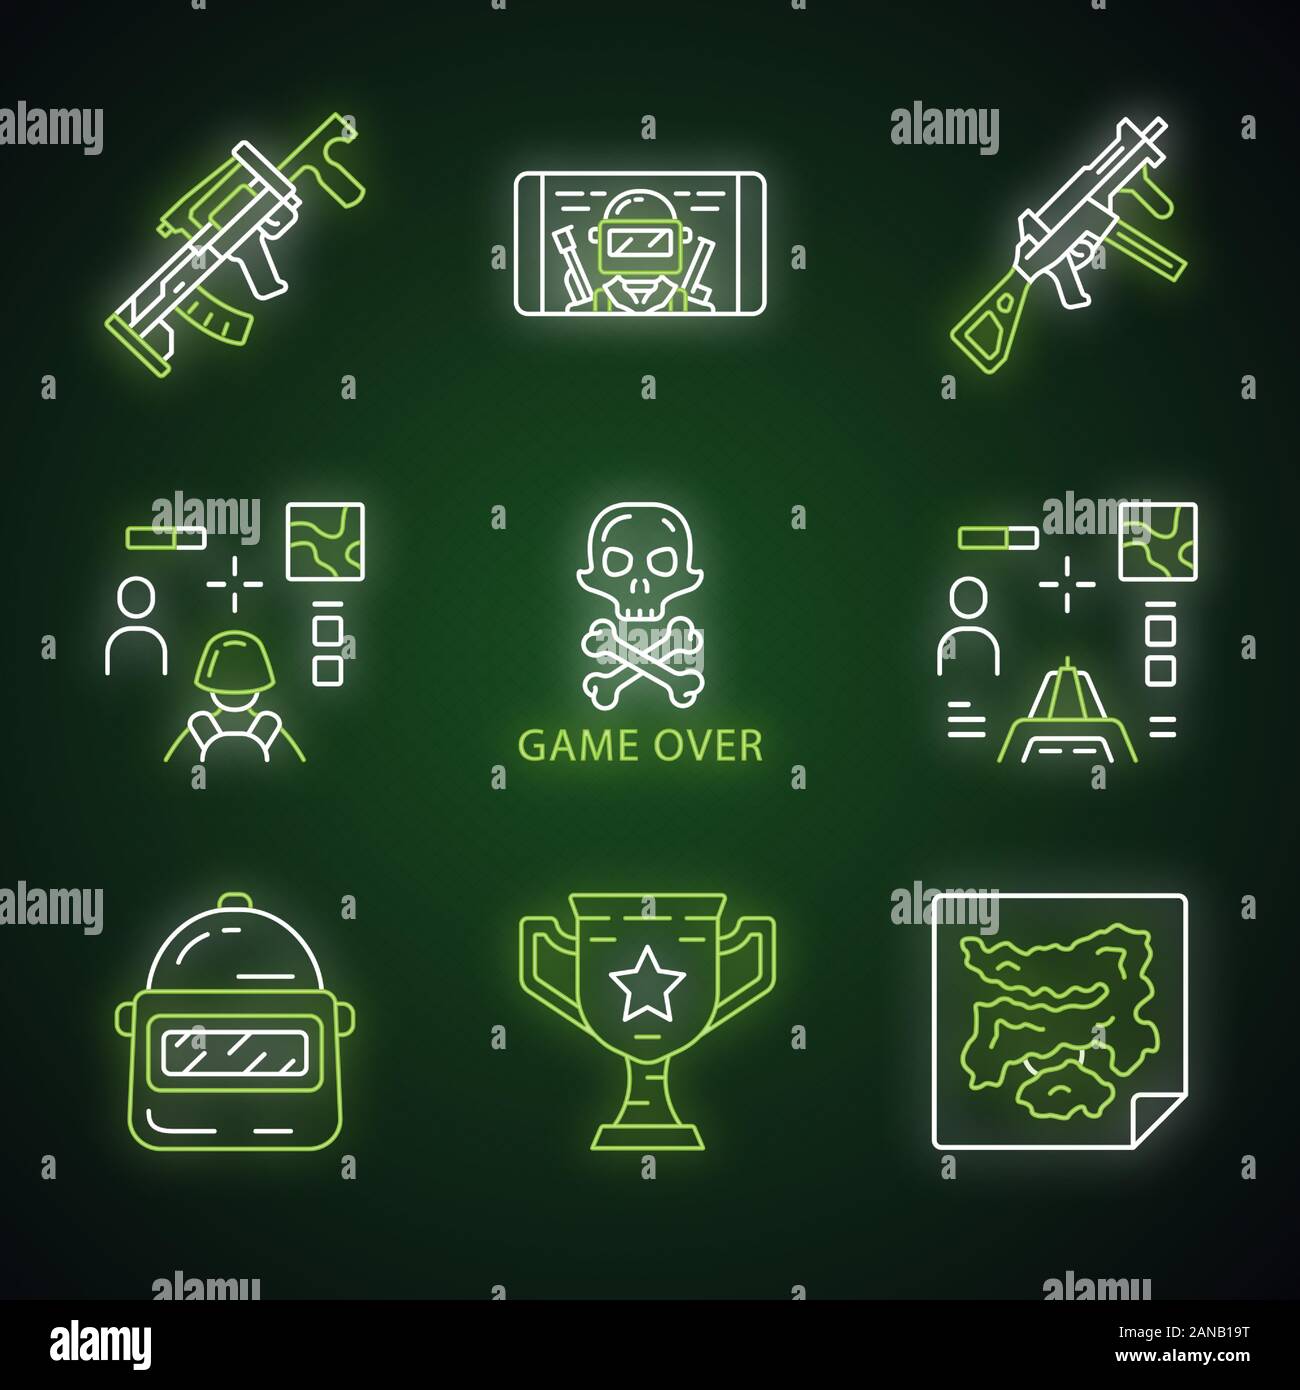 Online game inventory neon light icons set